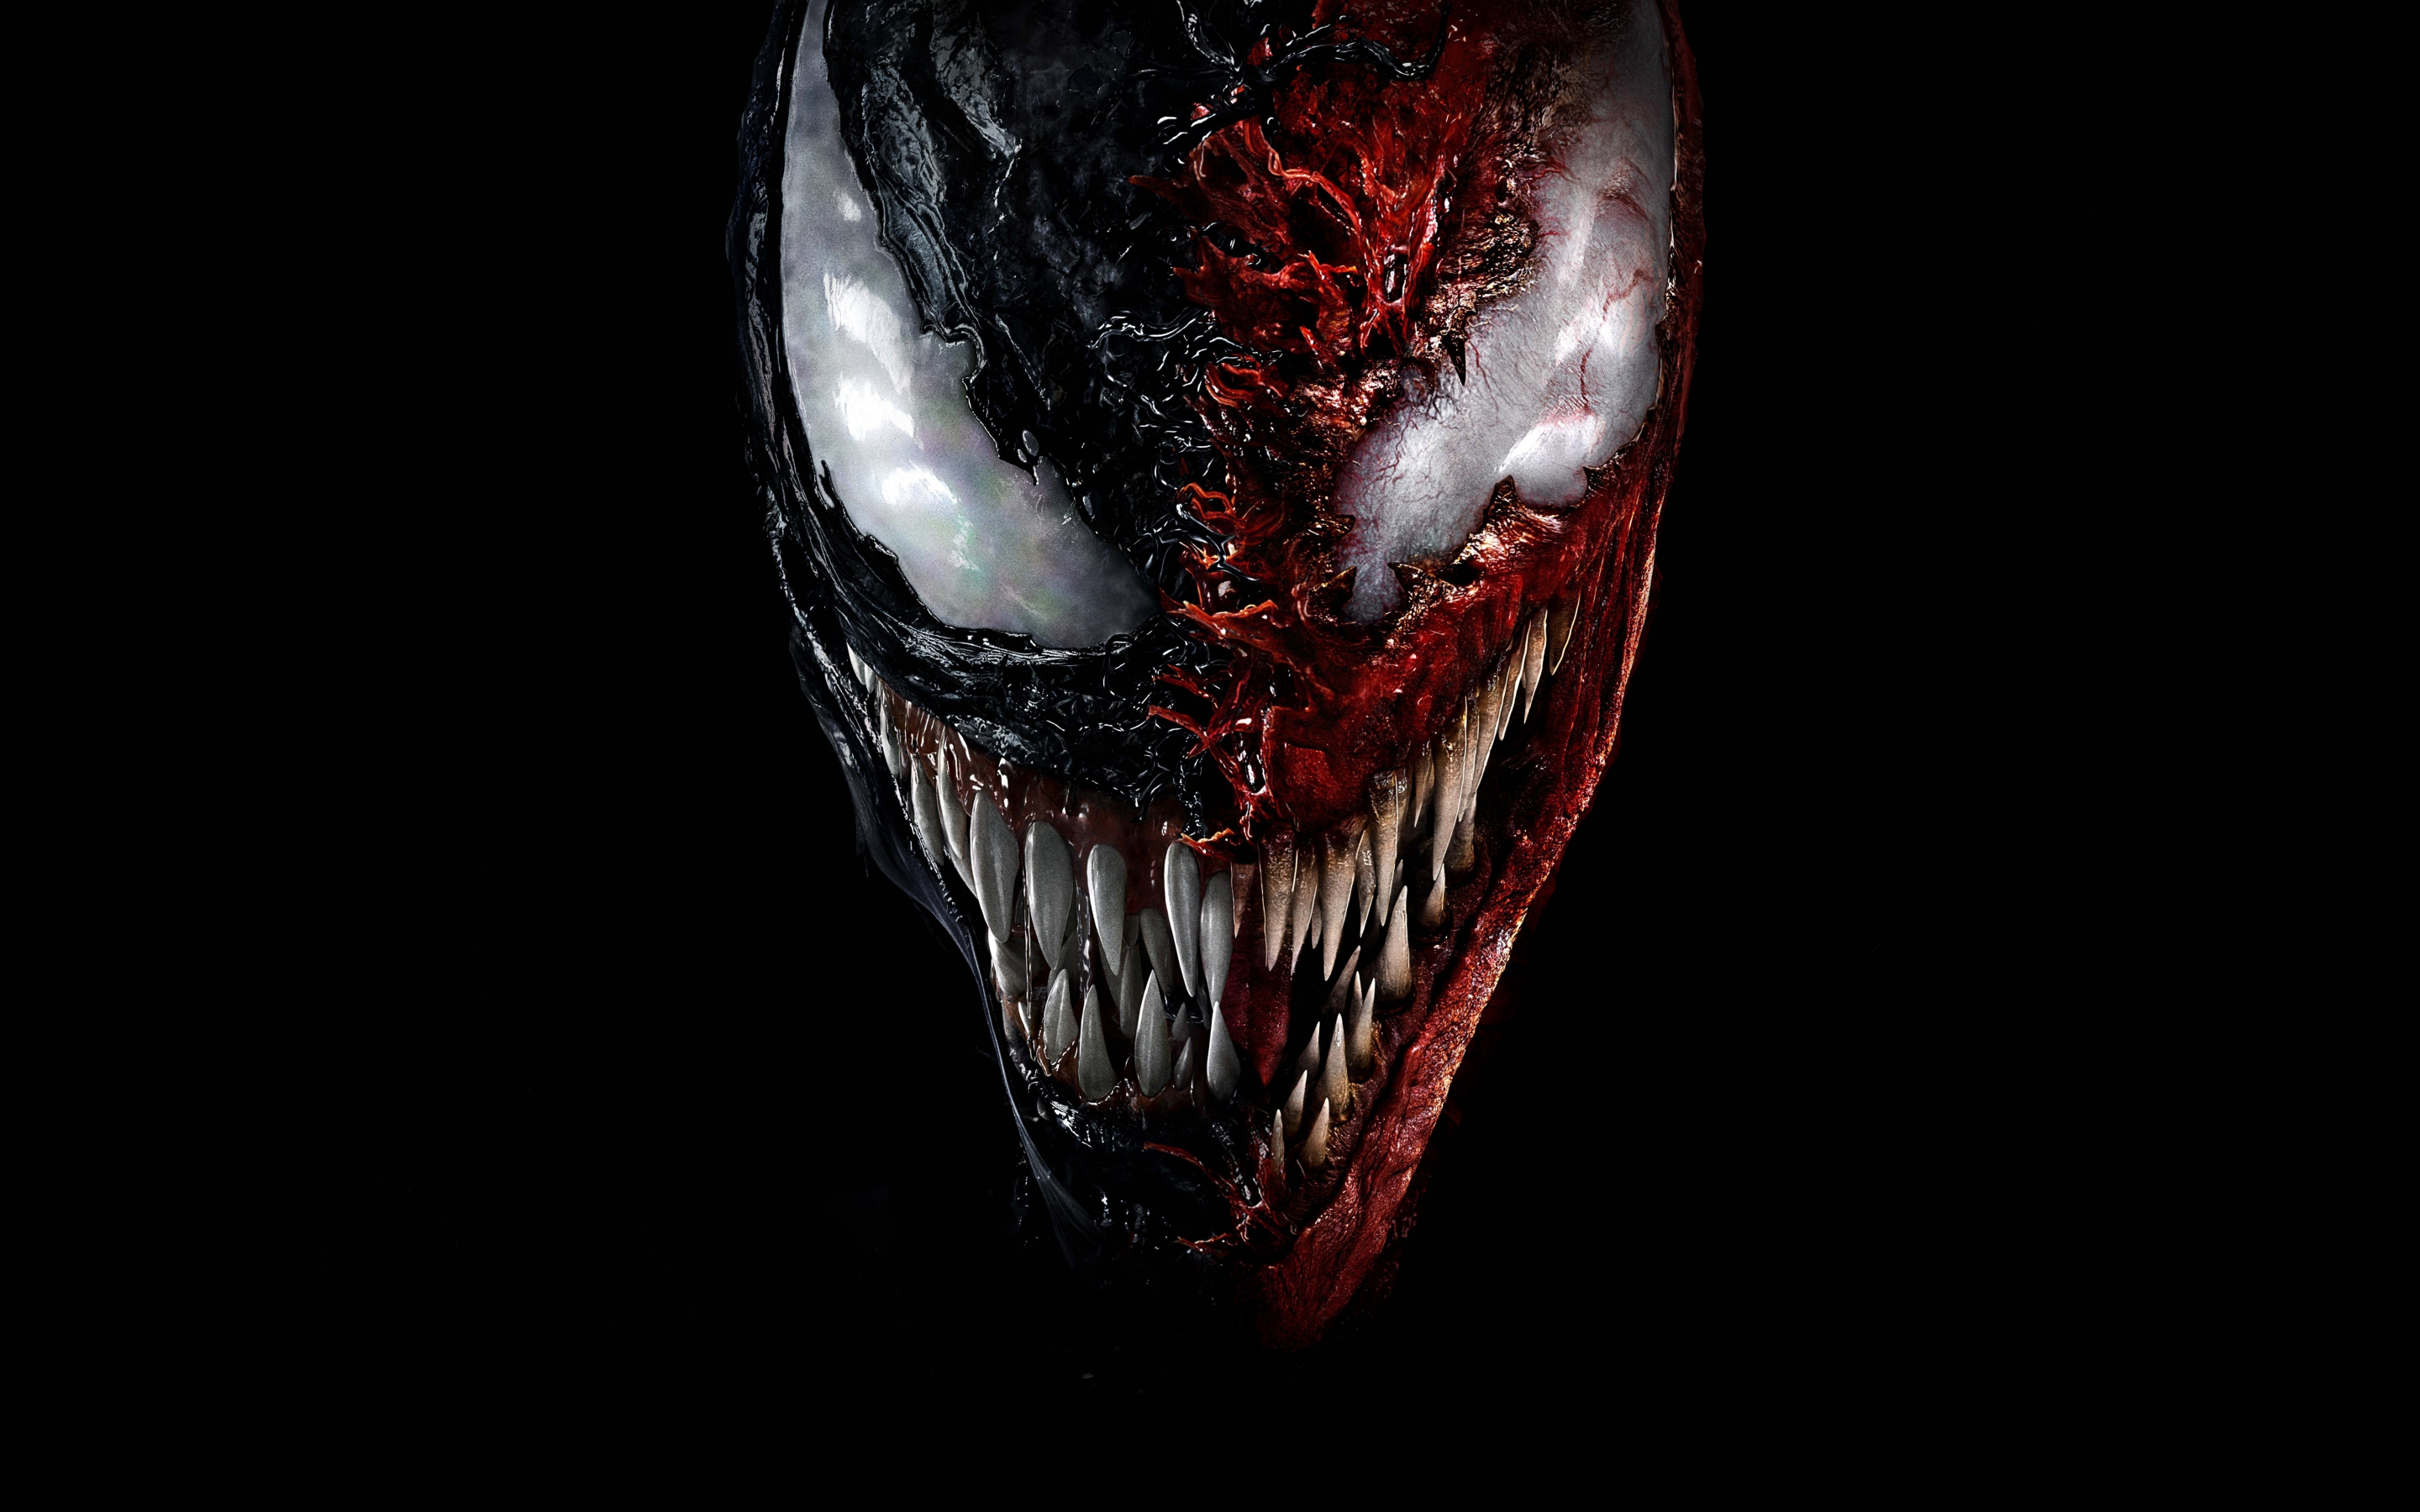 2021 movie, Venom: Let There Be Carnage, face-off, venom, carnage, 2880x1800 wallpaper